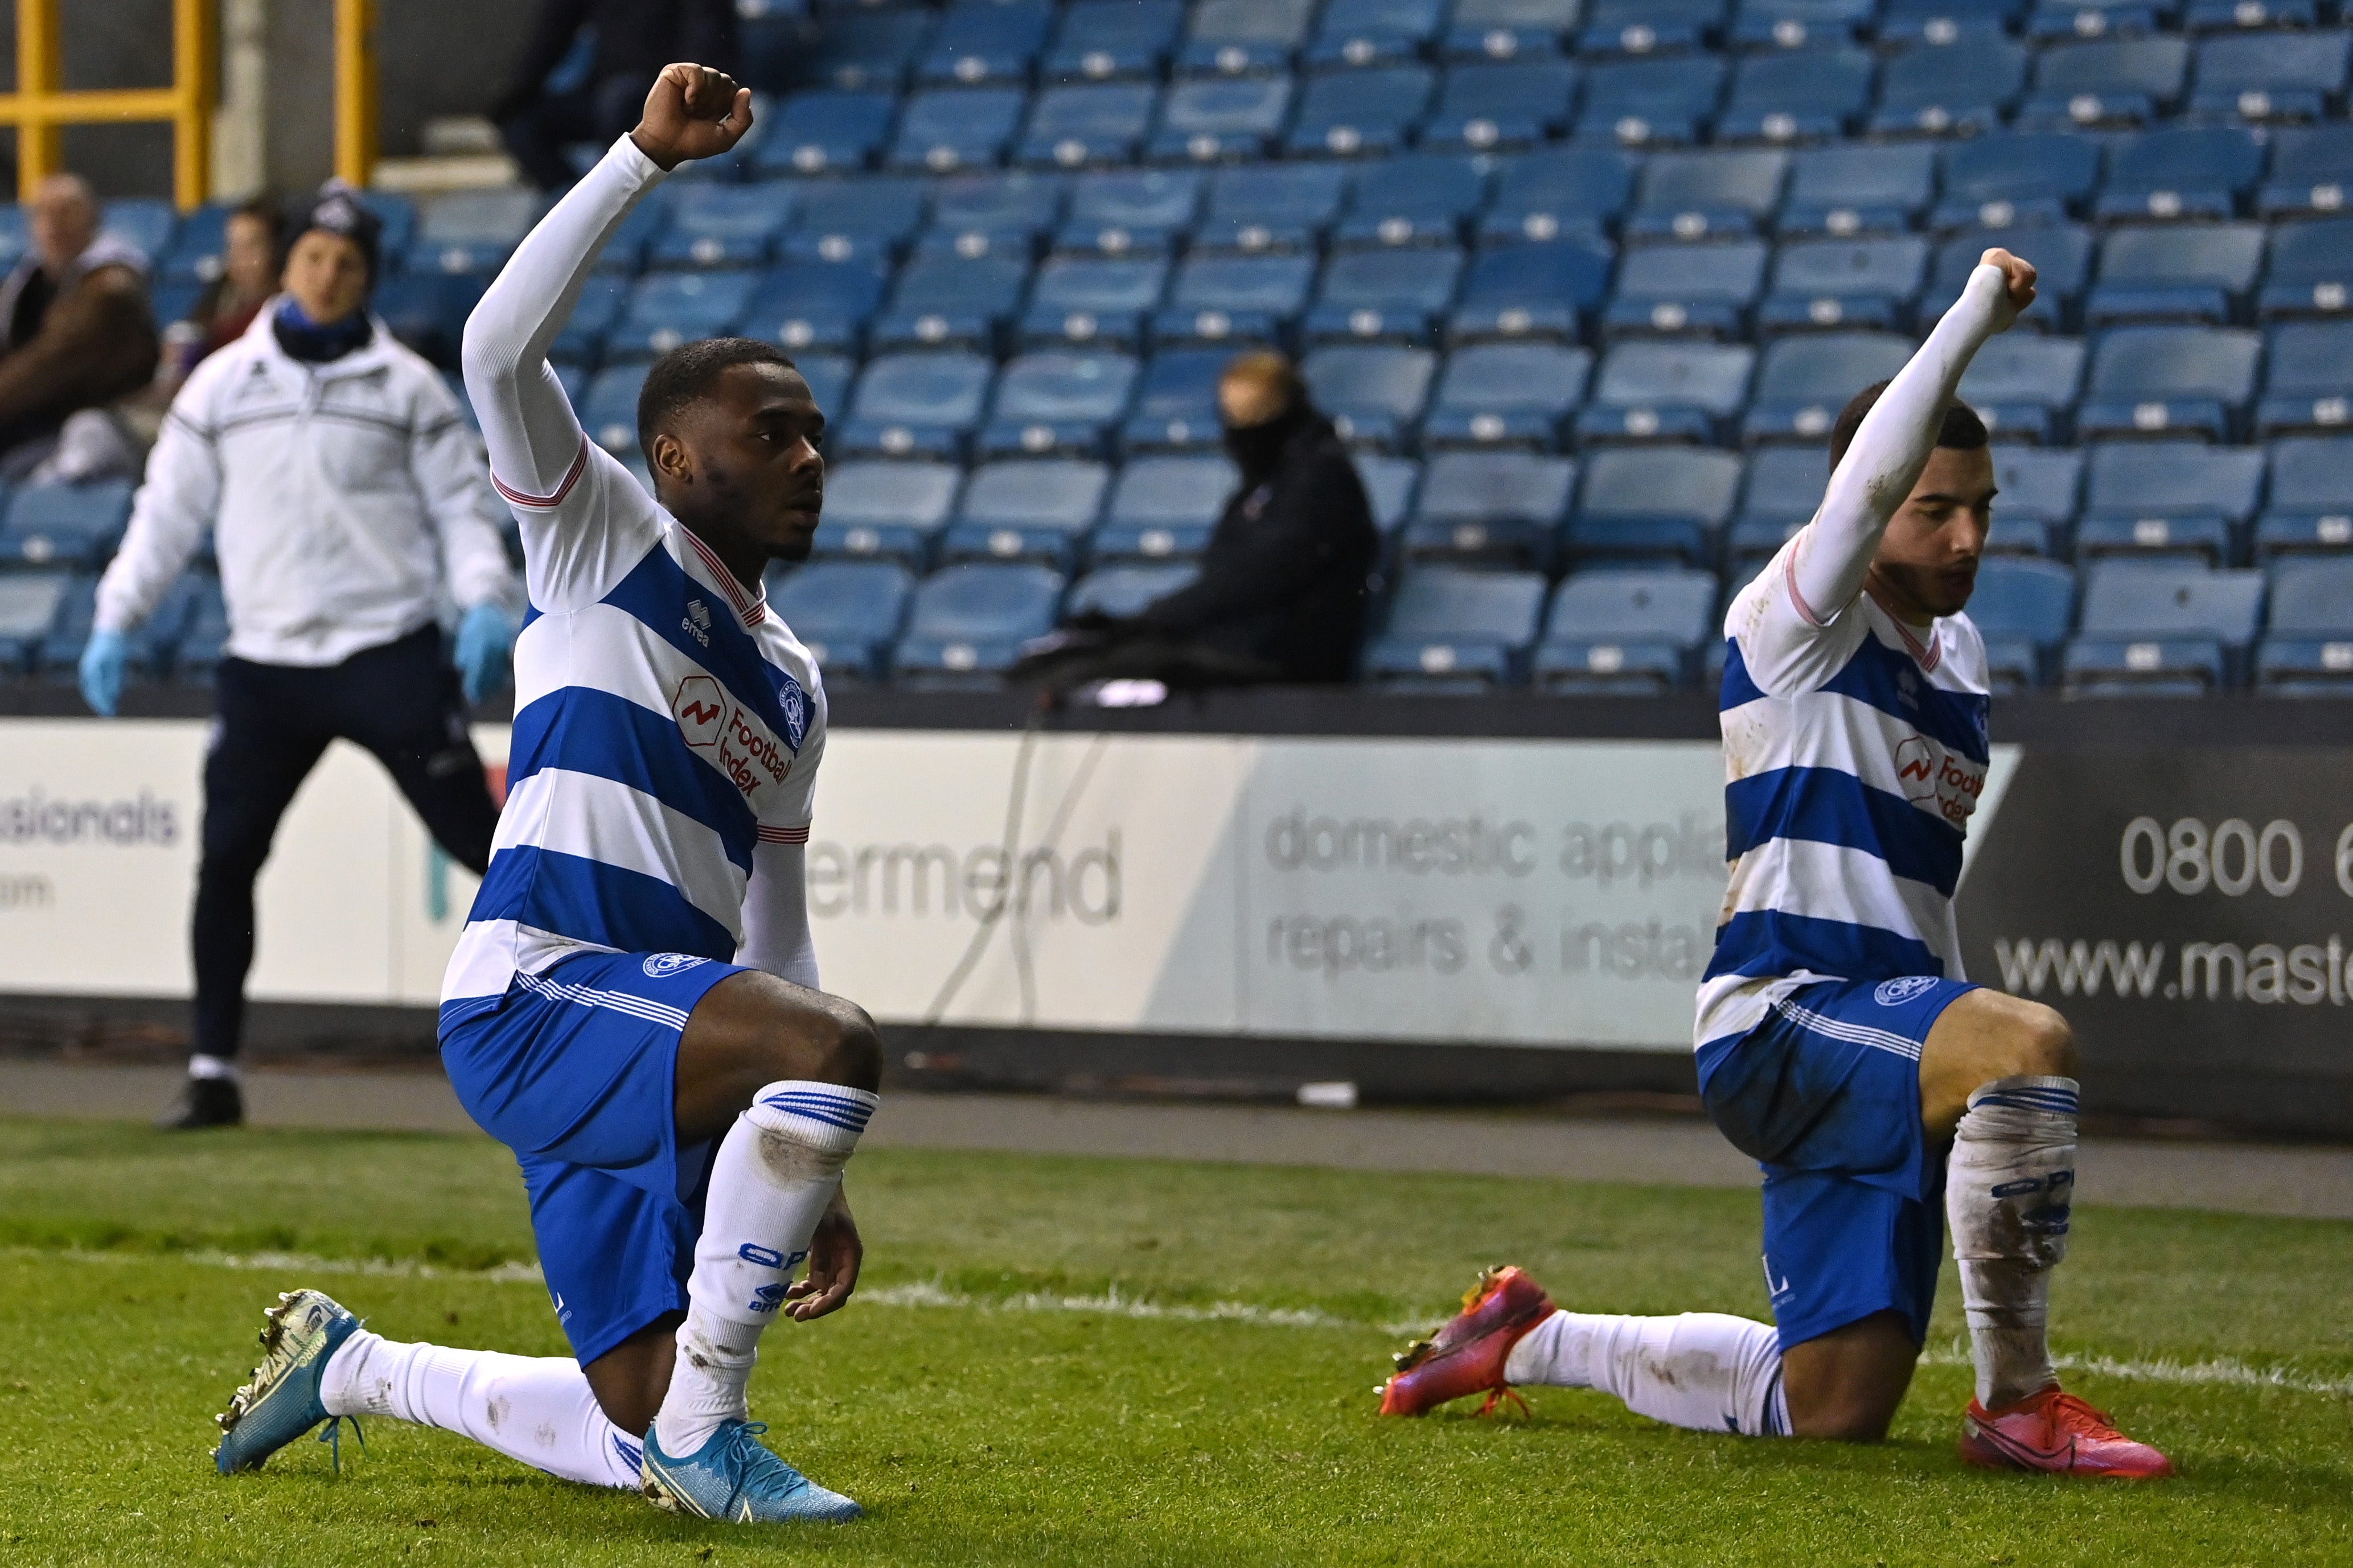 Osayi-Samuel joined teammate Ilias Chair in taking a knee during a recent game against Millwall